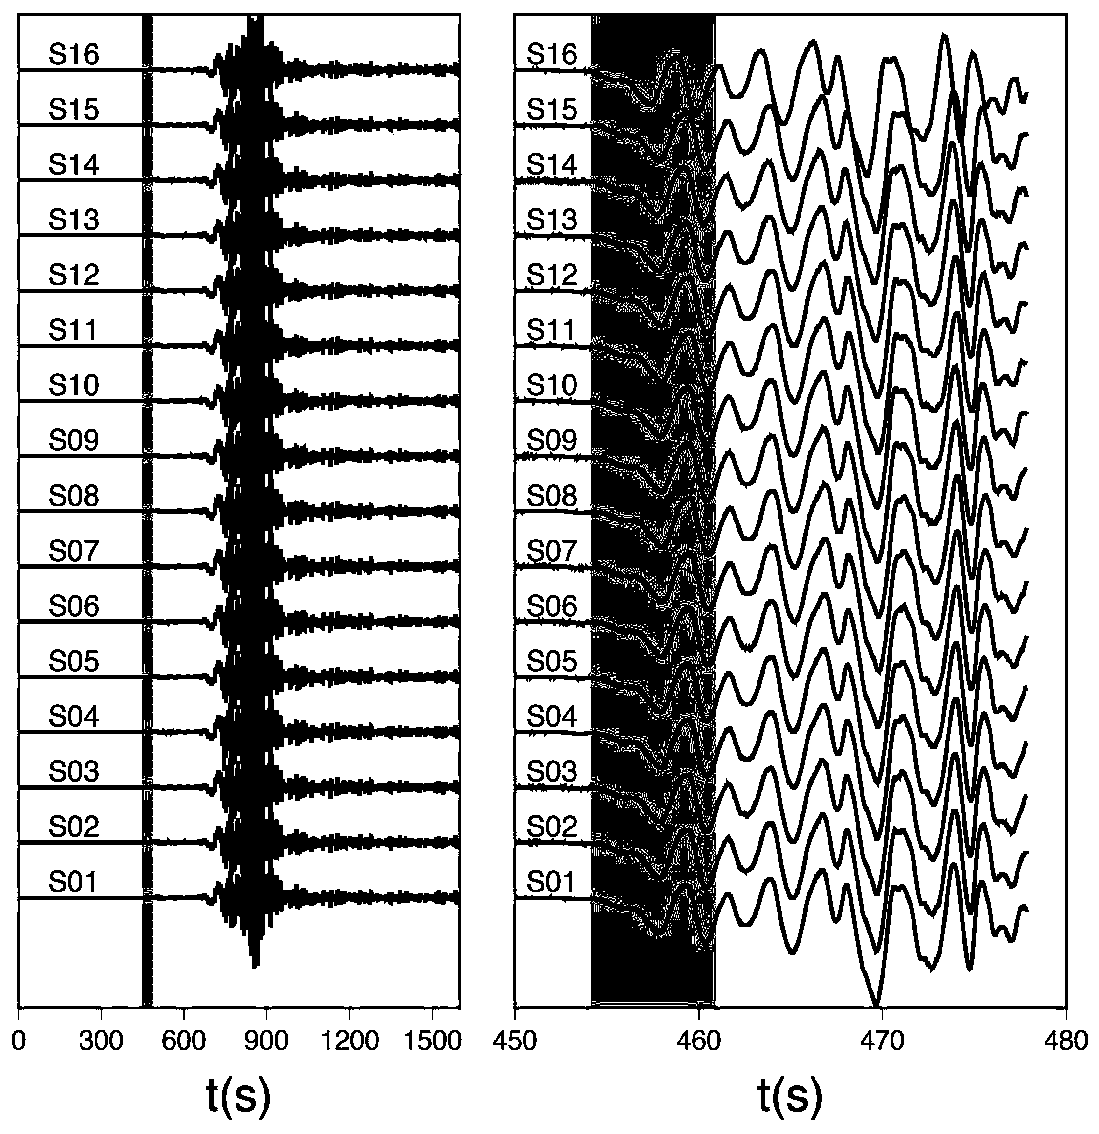 A high-resolution method for determining p-wave inverse azimuth and slowness of seismic events